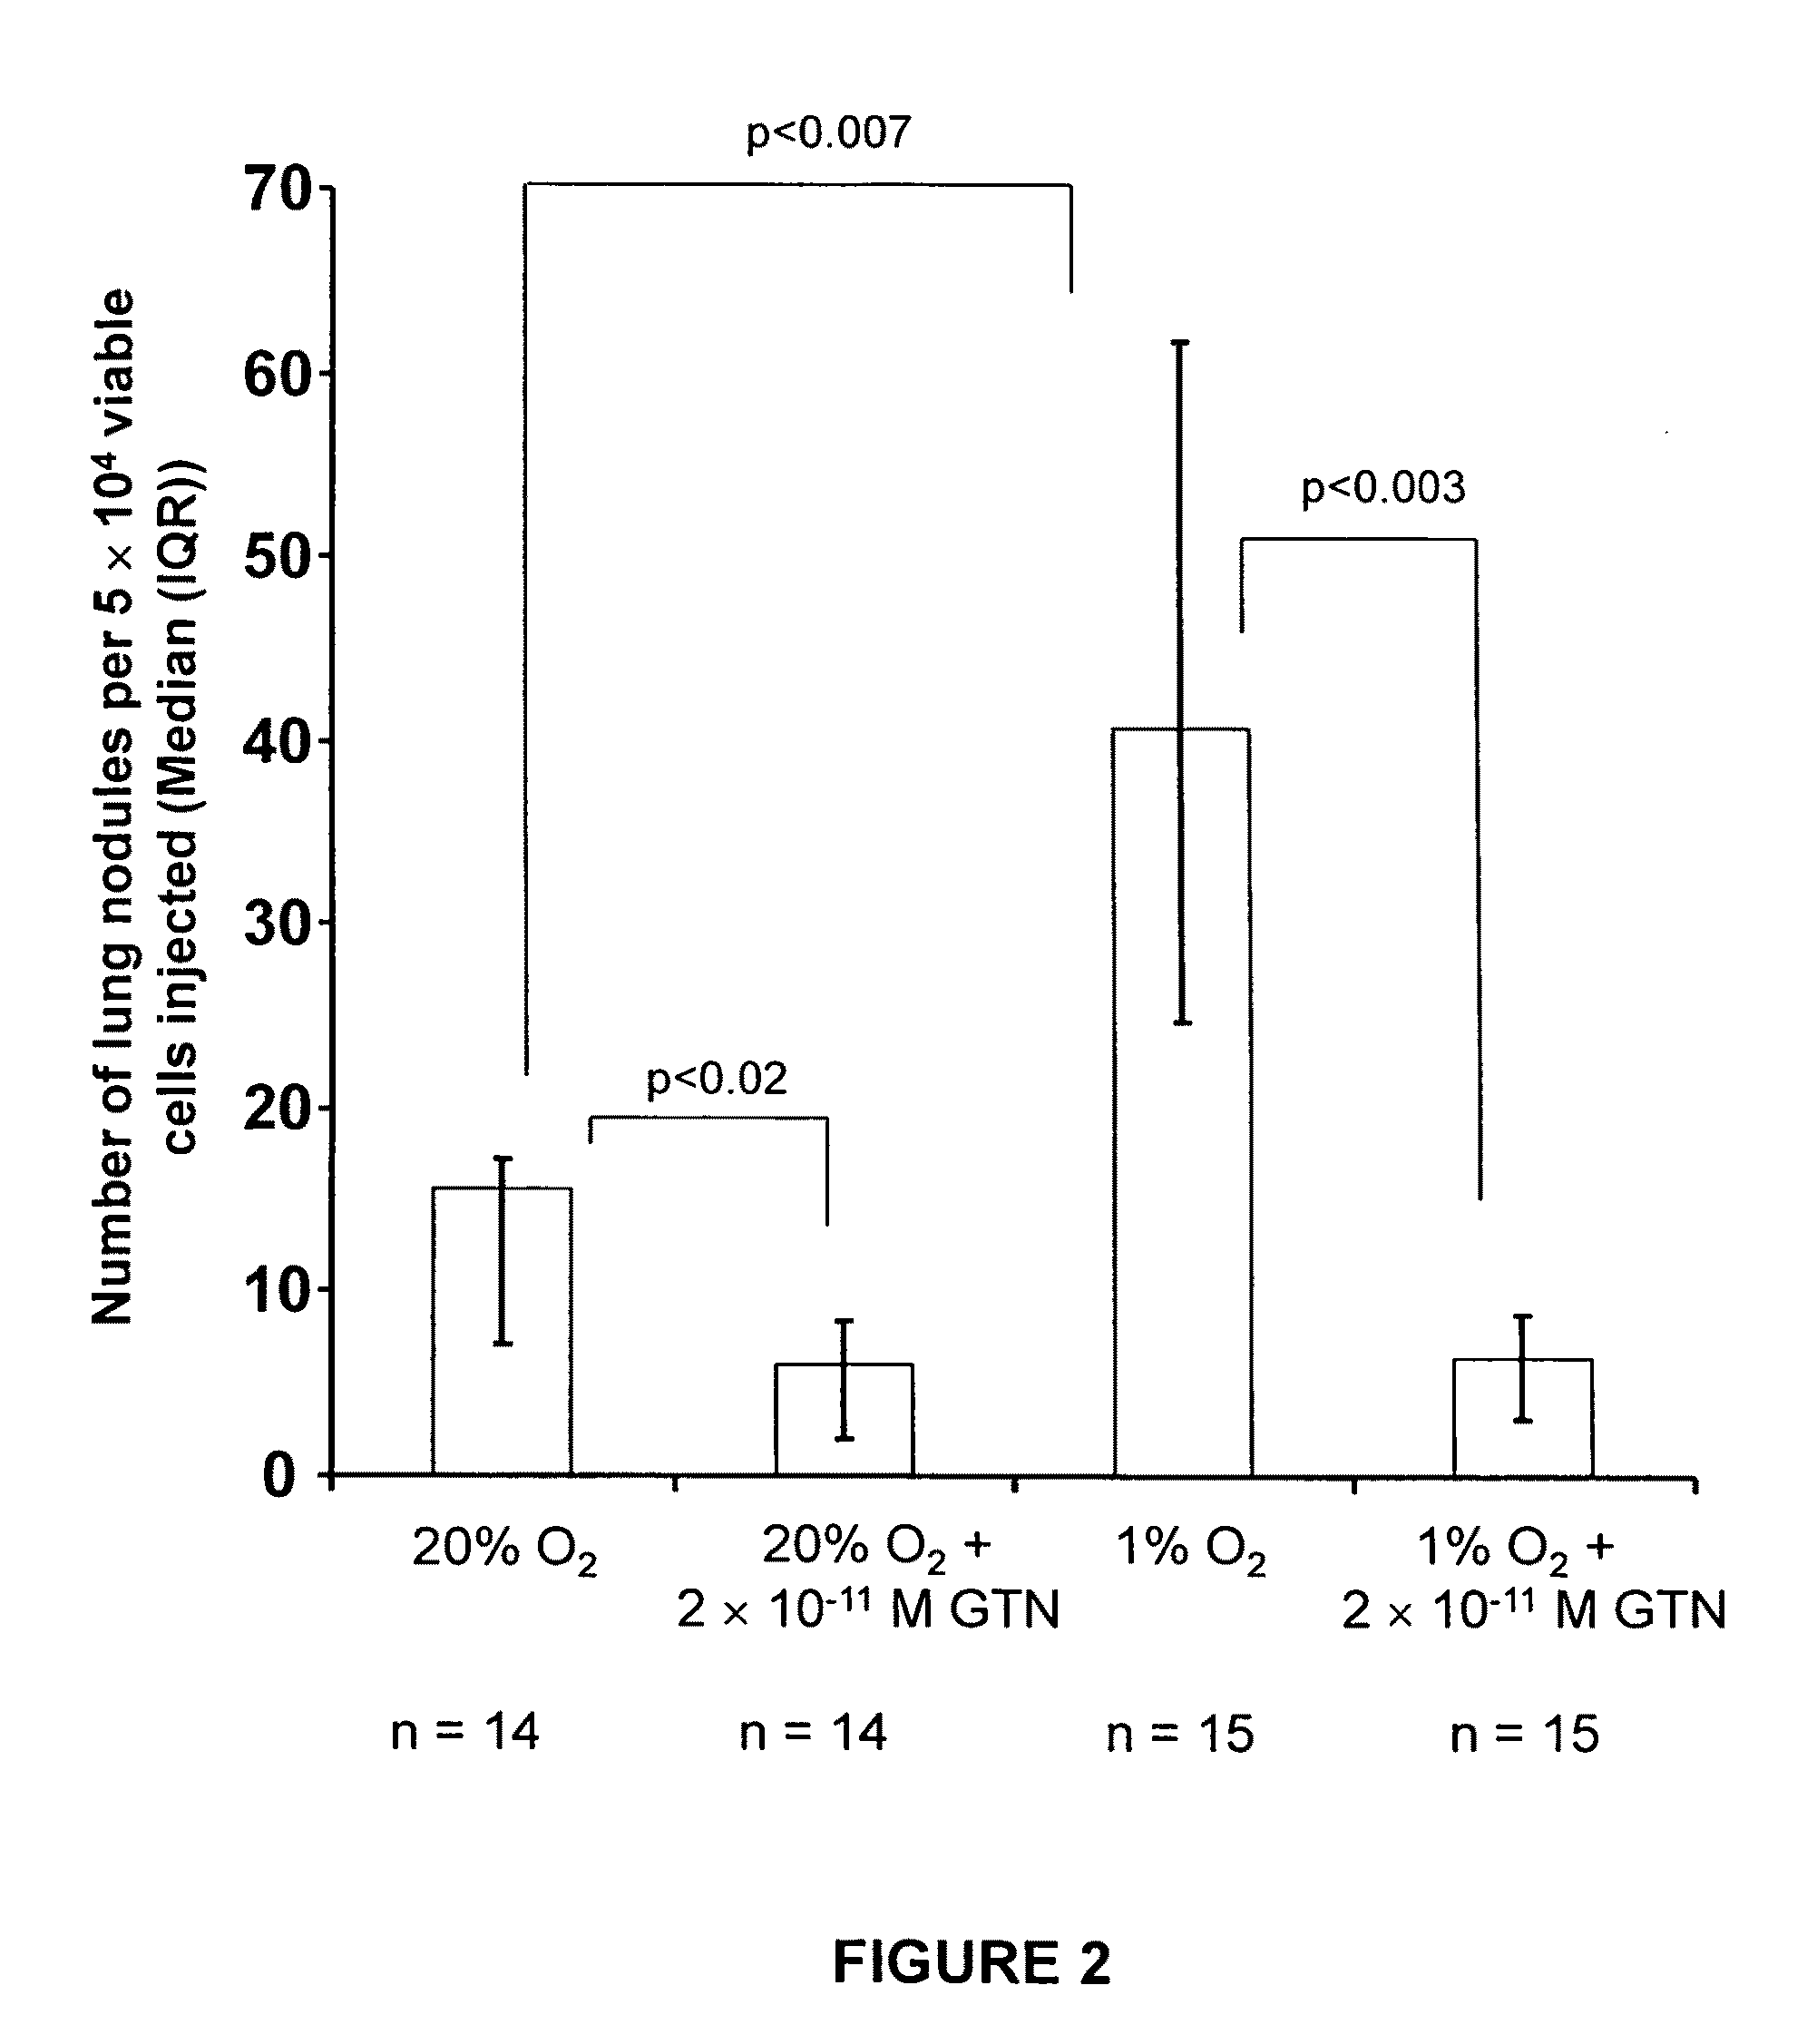 Formulations and methods of using nitric oxide mimetics in cancer treatment